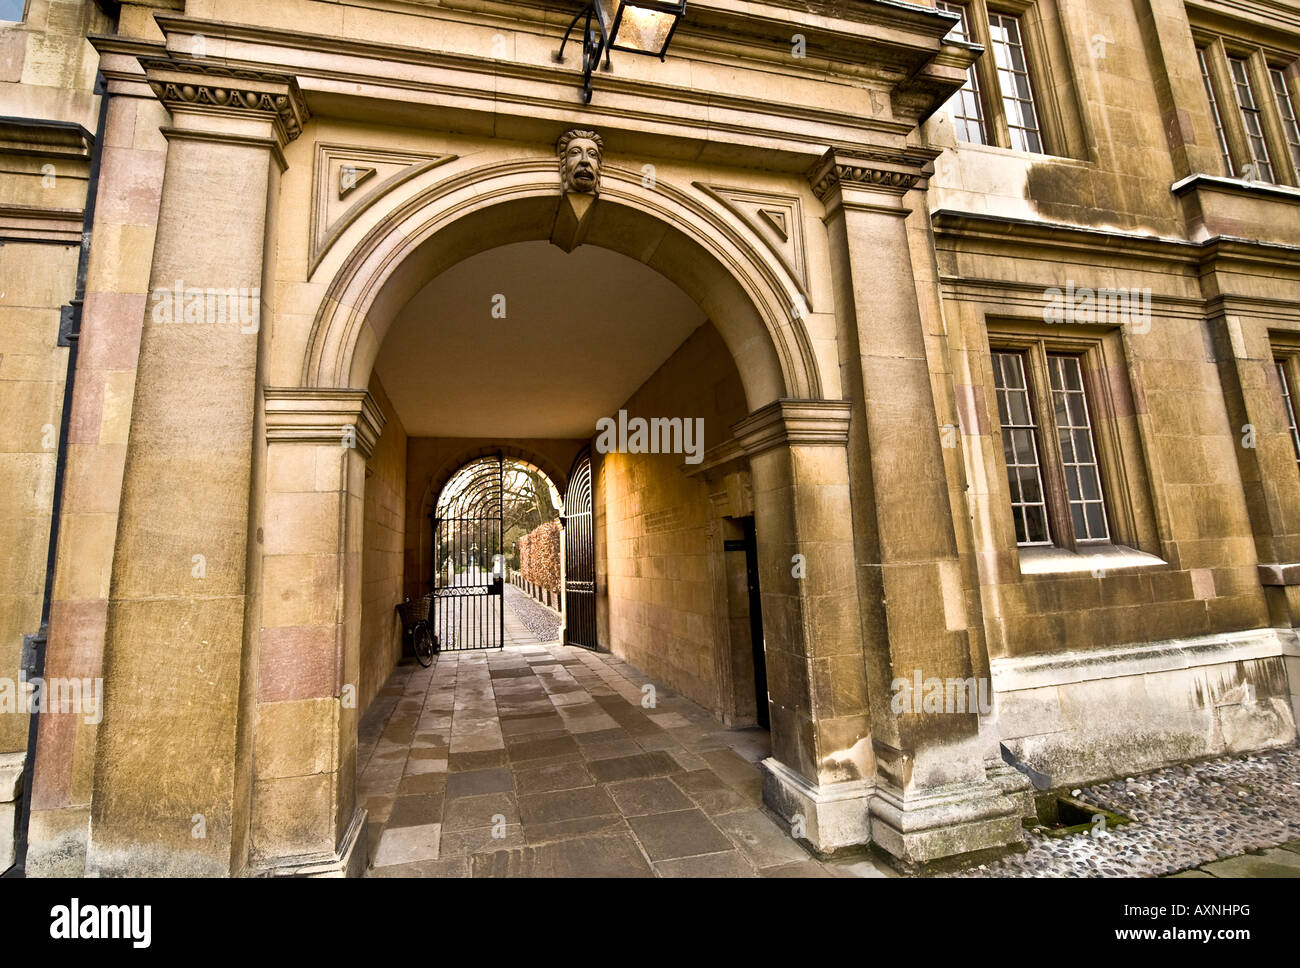 cambridge college architecture building university pillars door windows stone historic old listed buildings wall background text Stock Photo